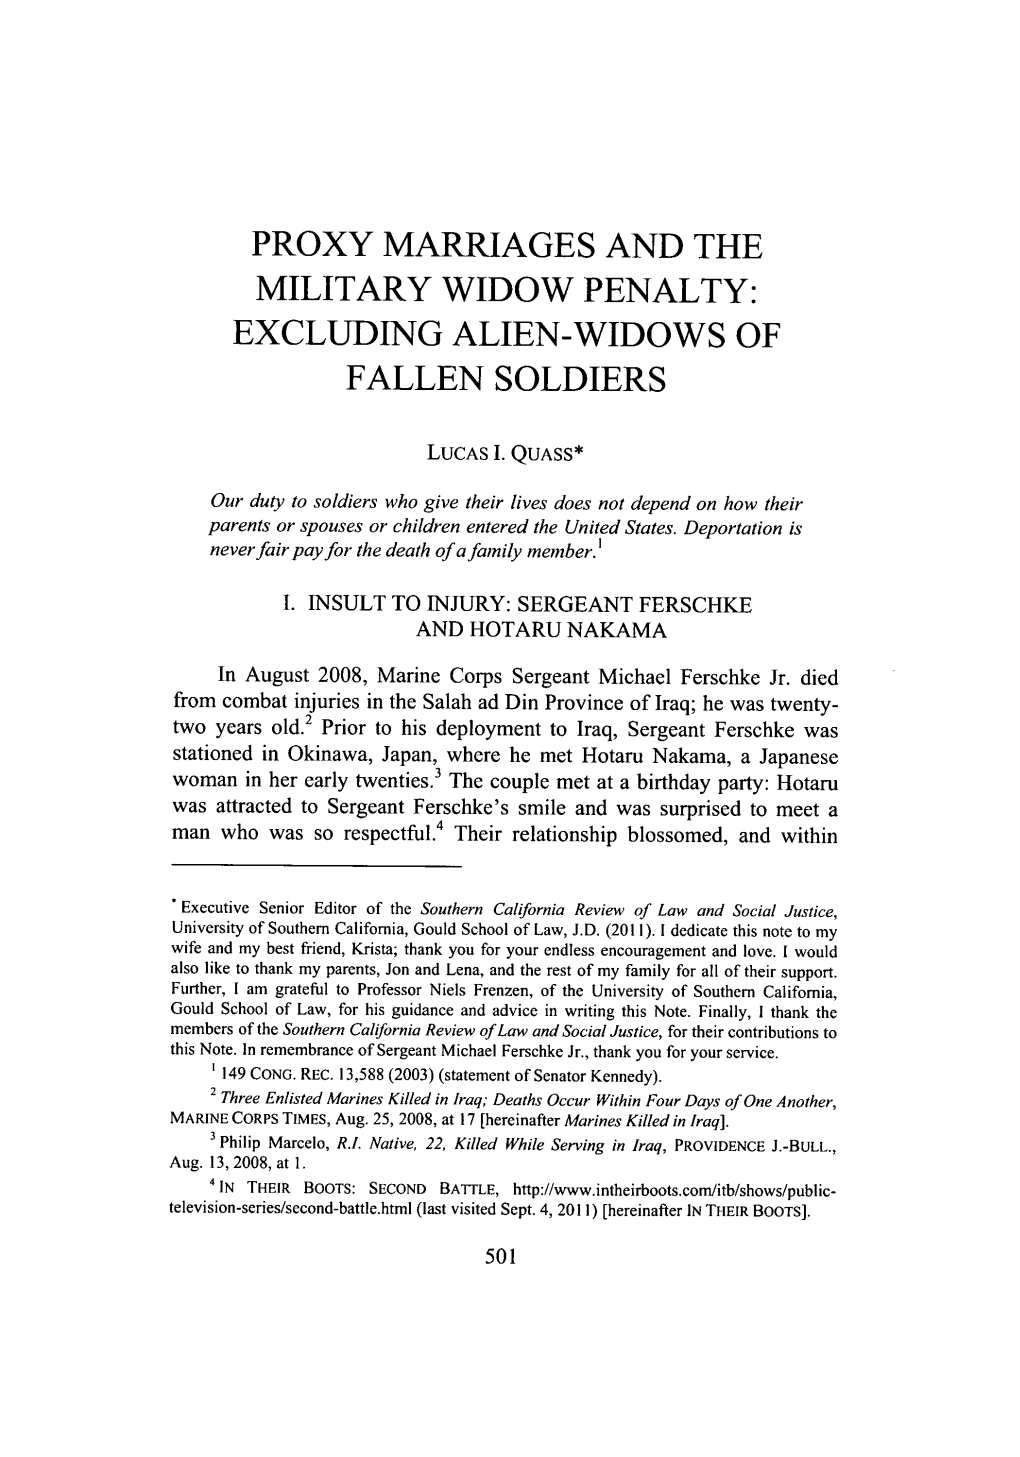 Proxy Marriages and the Military Widow Penalty: Excluding Alien-Widows of Fallen Soldiers